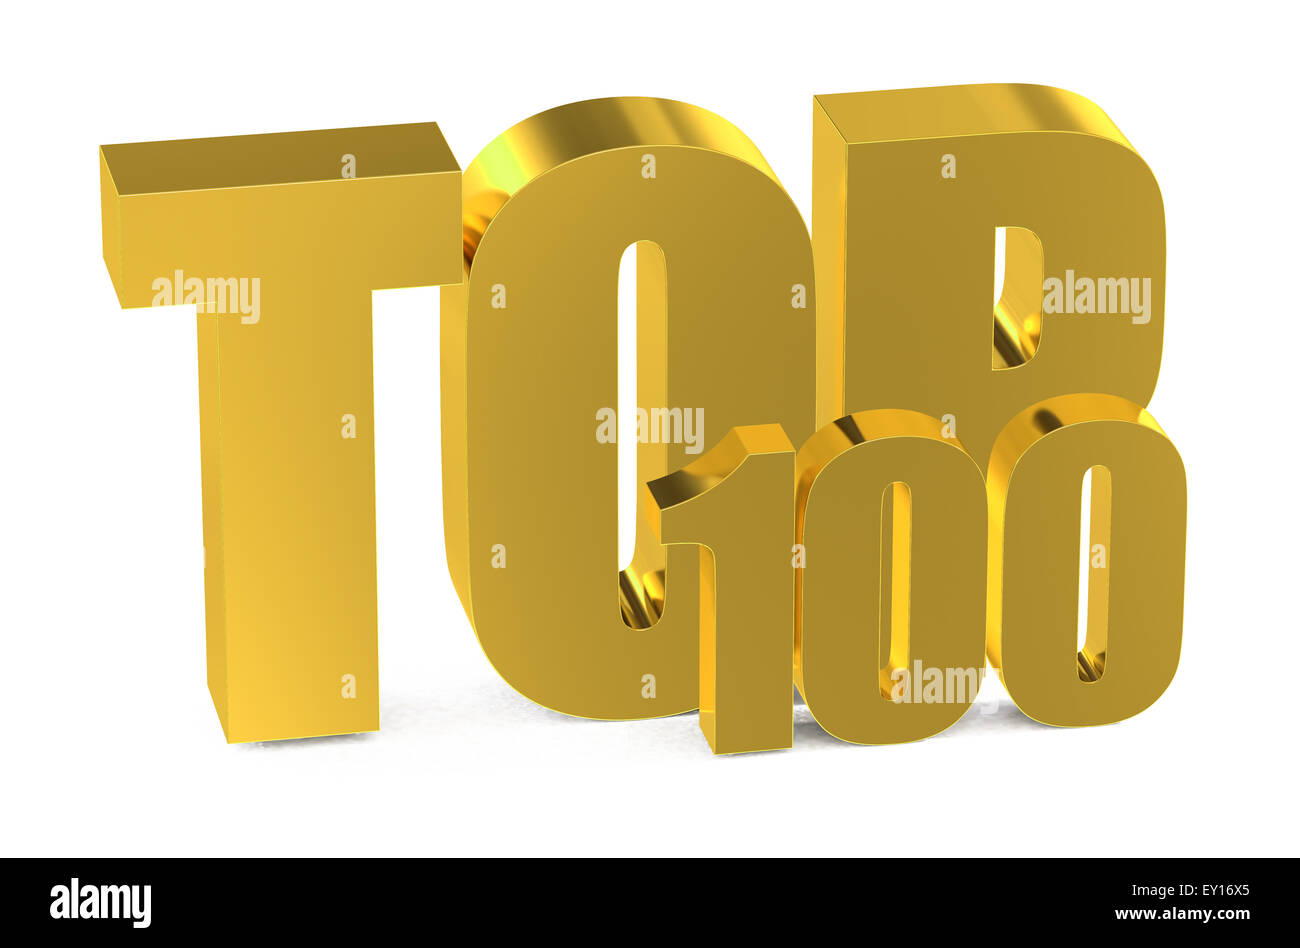 Top 100, 3d illustration isolated on white background Stock Photo